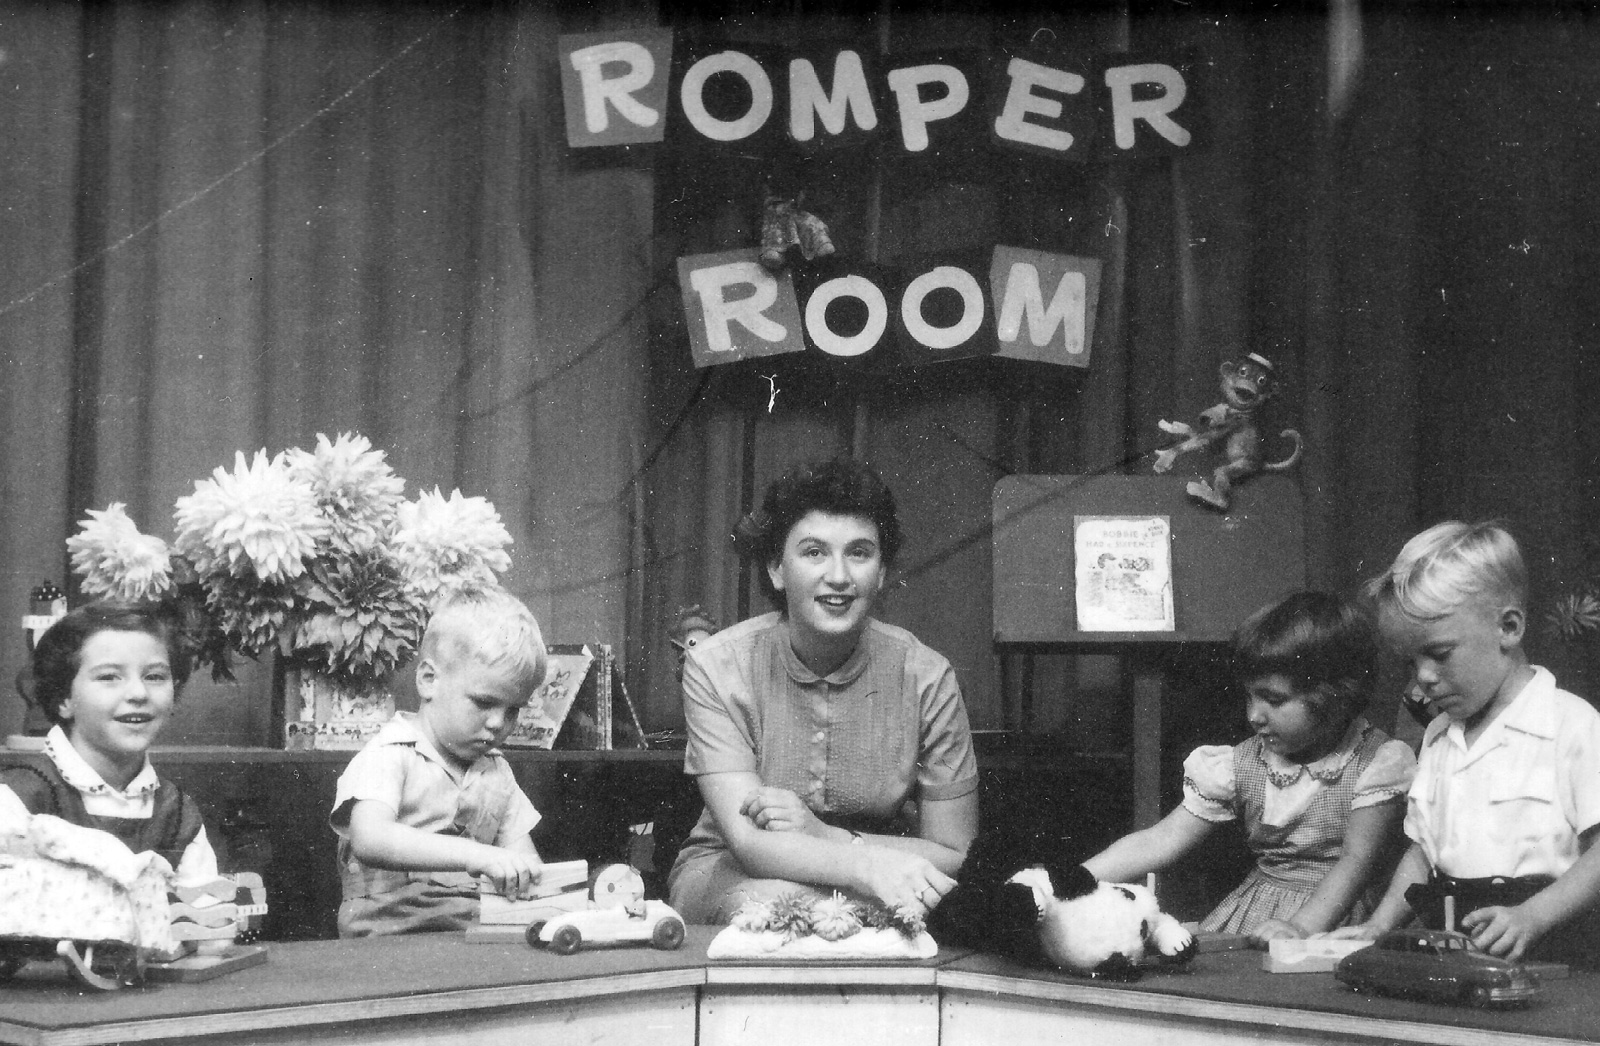 A woman sitting in the centre of a TV studio desk with children either side of her. A sign above her says 'Romper Room'. c1957.